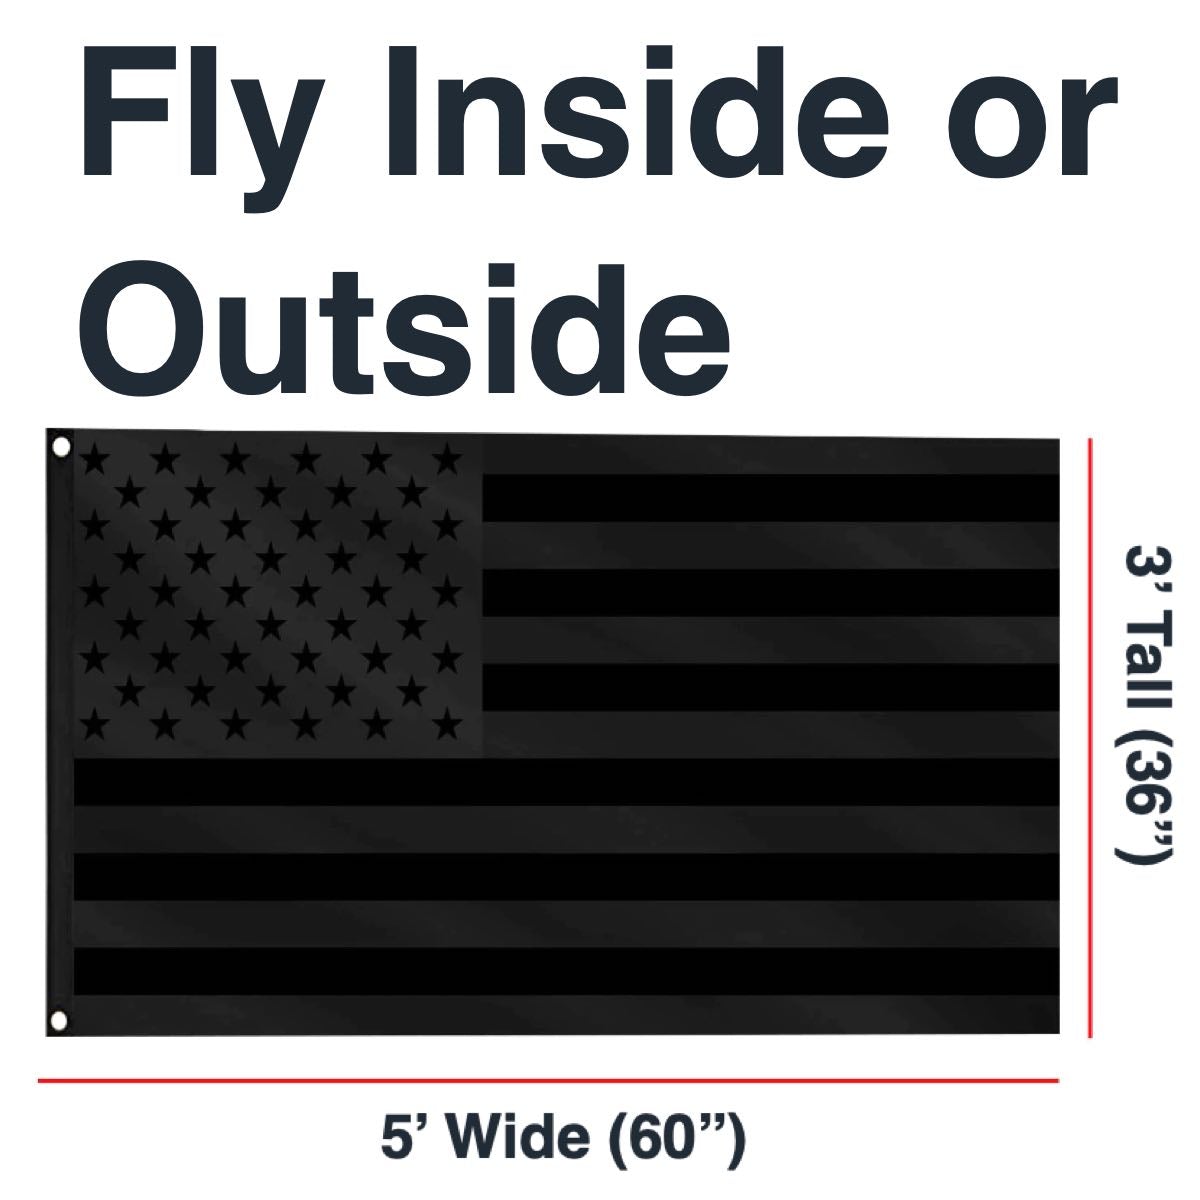 What does the black American flag mean?